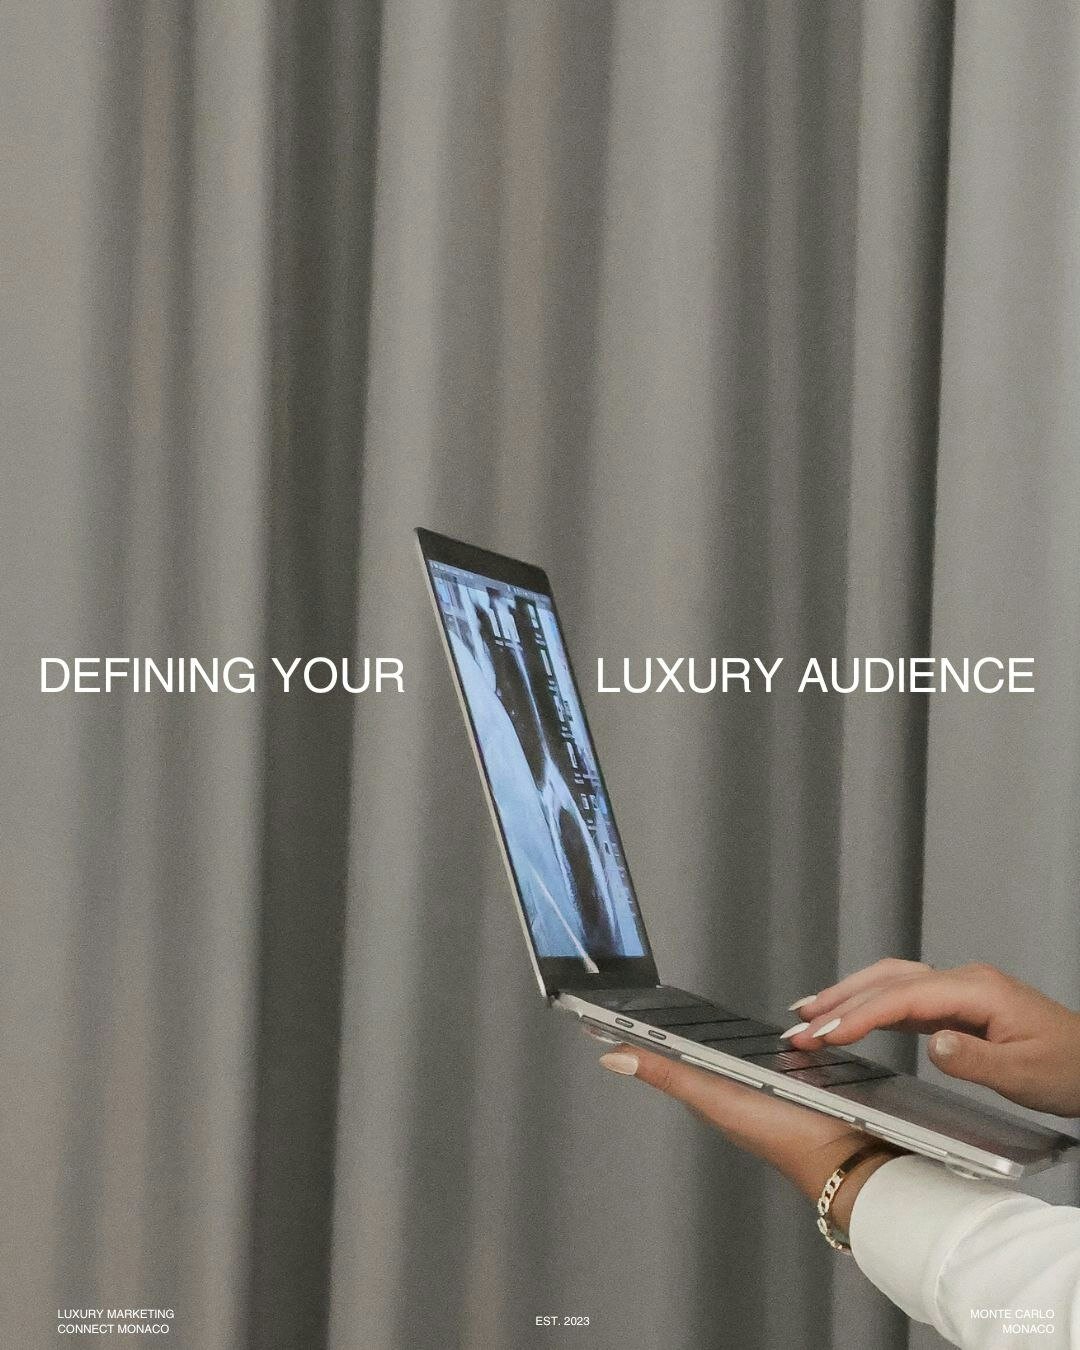 Defining your luxury audience is crucial for successful marketing strategies. Luxury consumers value exclusivity, quality, and exceptional service. 

Understanding their preferences, lifestyles, and purchasing behaviors can help tailor your marketing